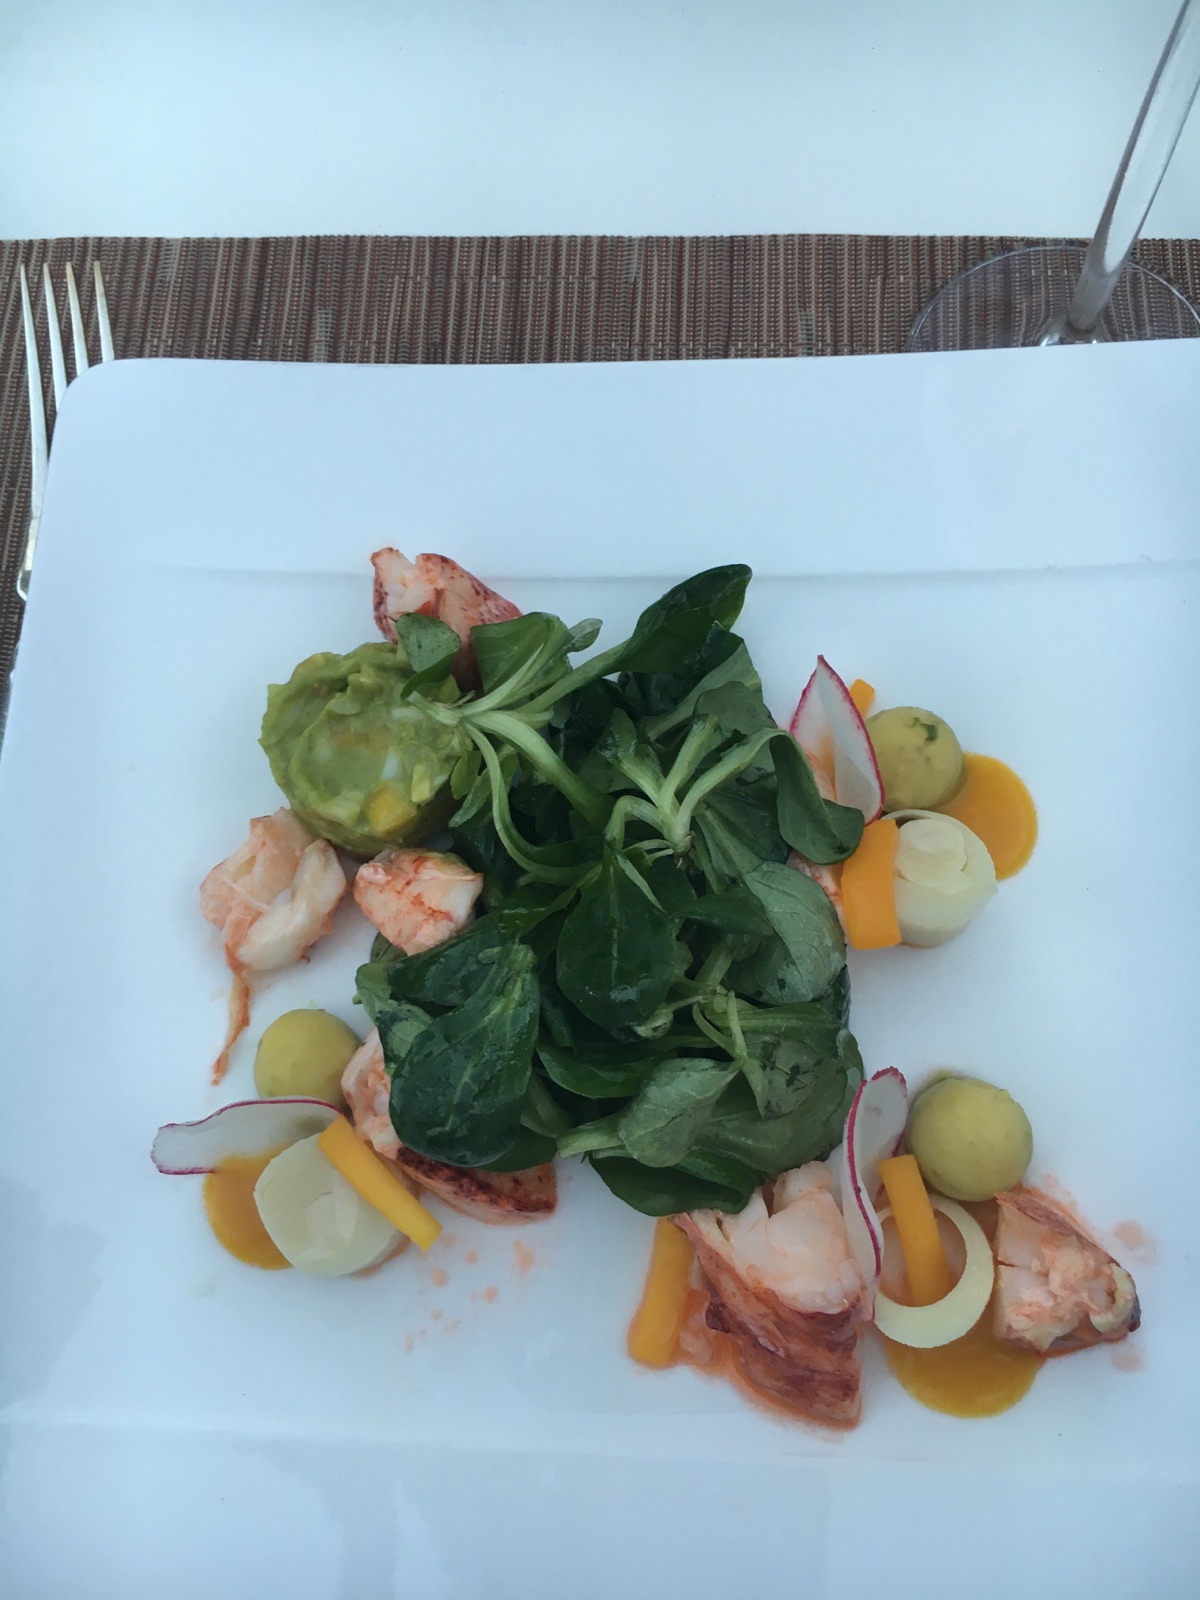 Chilled Salad of Maine Lobster